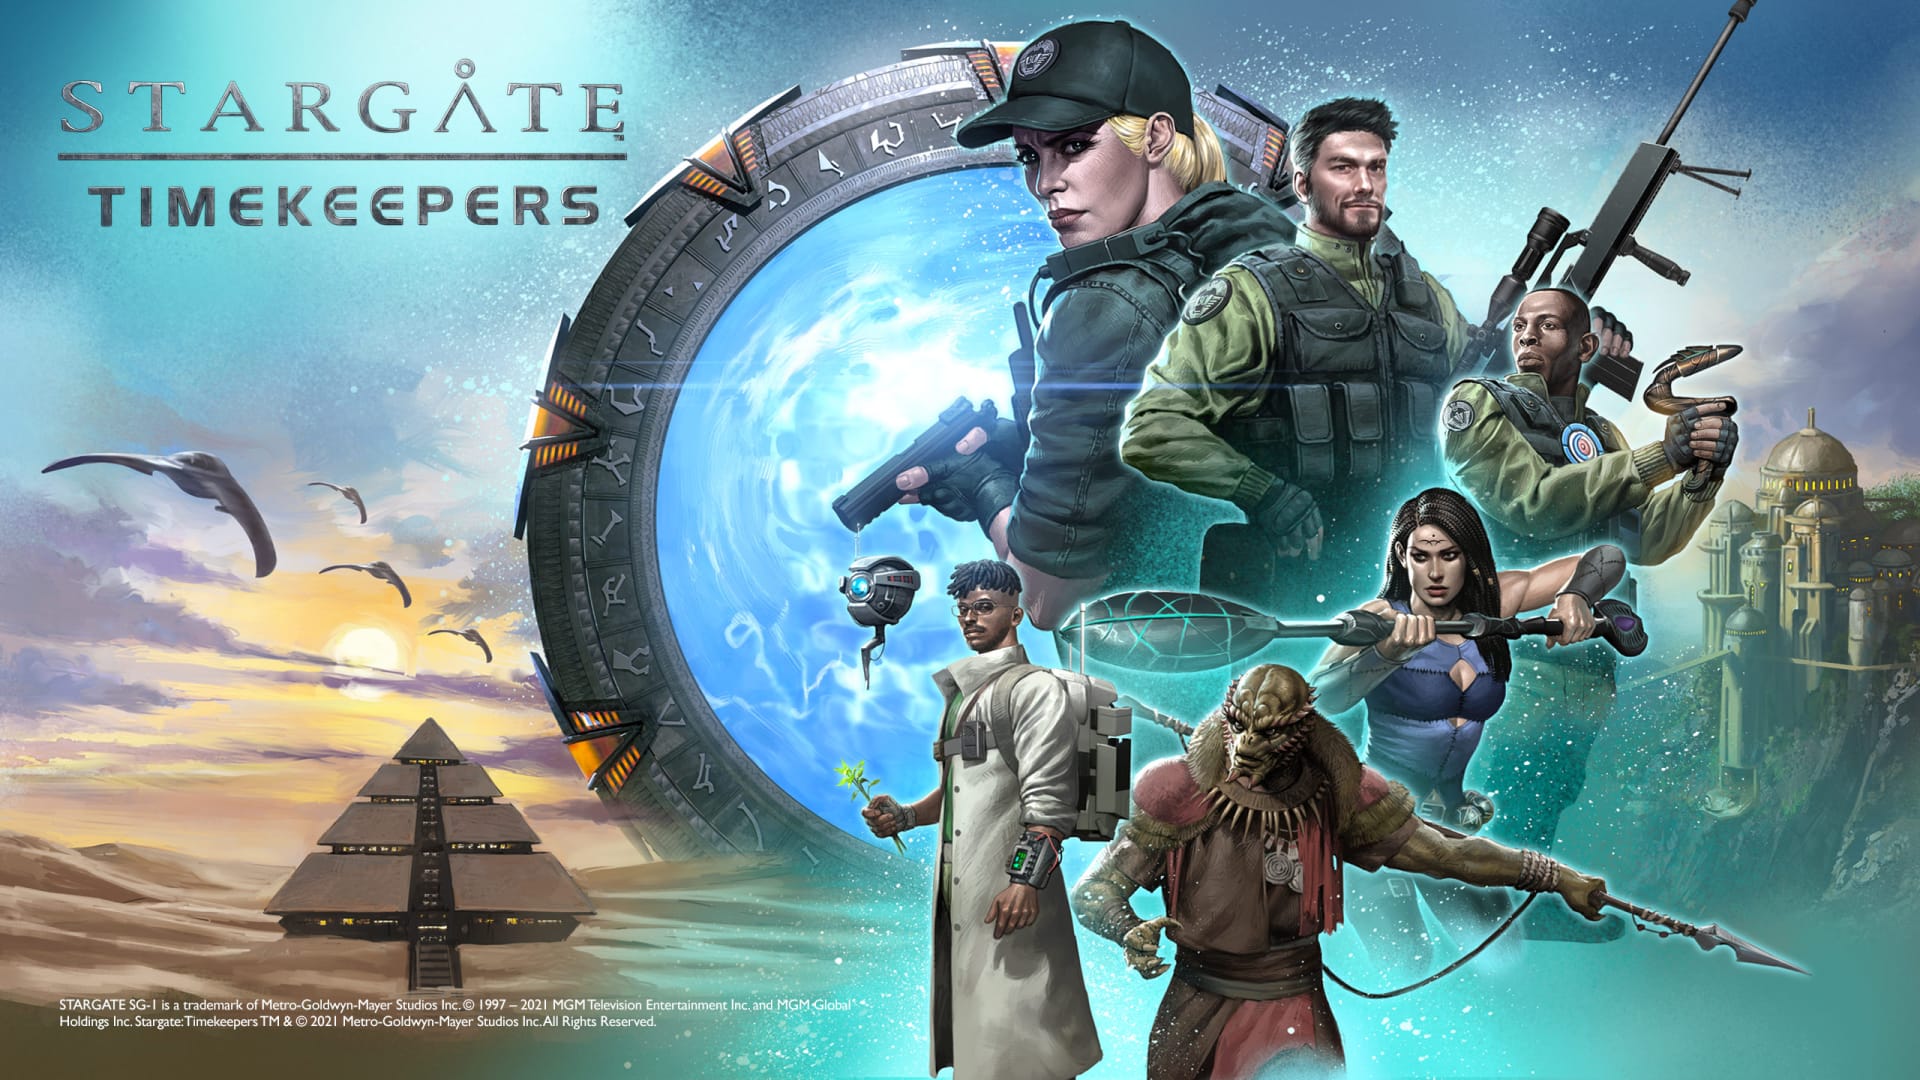 Stargate: Timekeepers Gets New Release Date After Last-Minute Delay